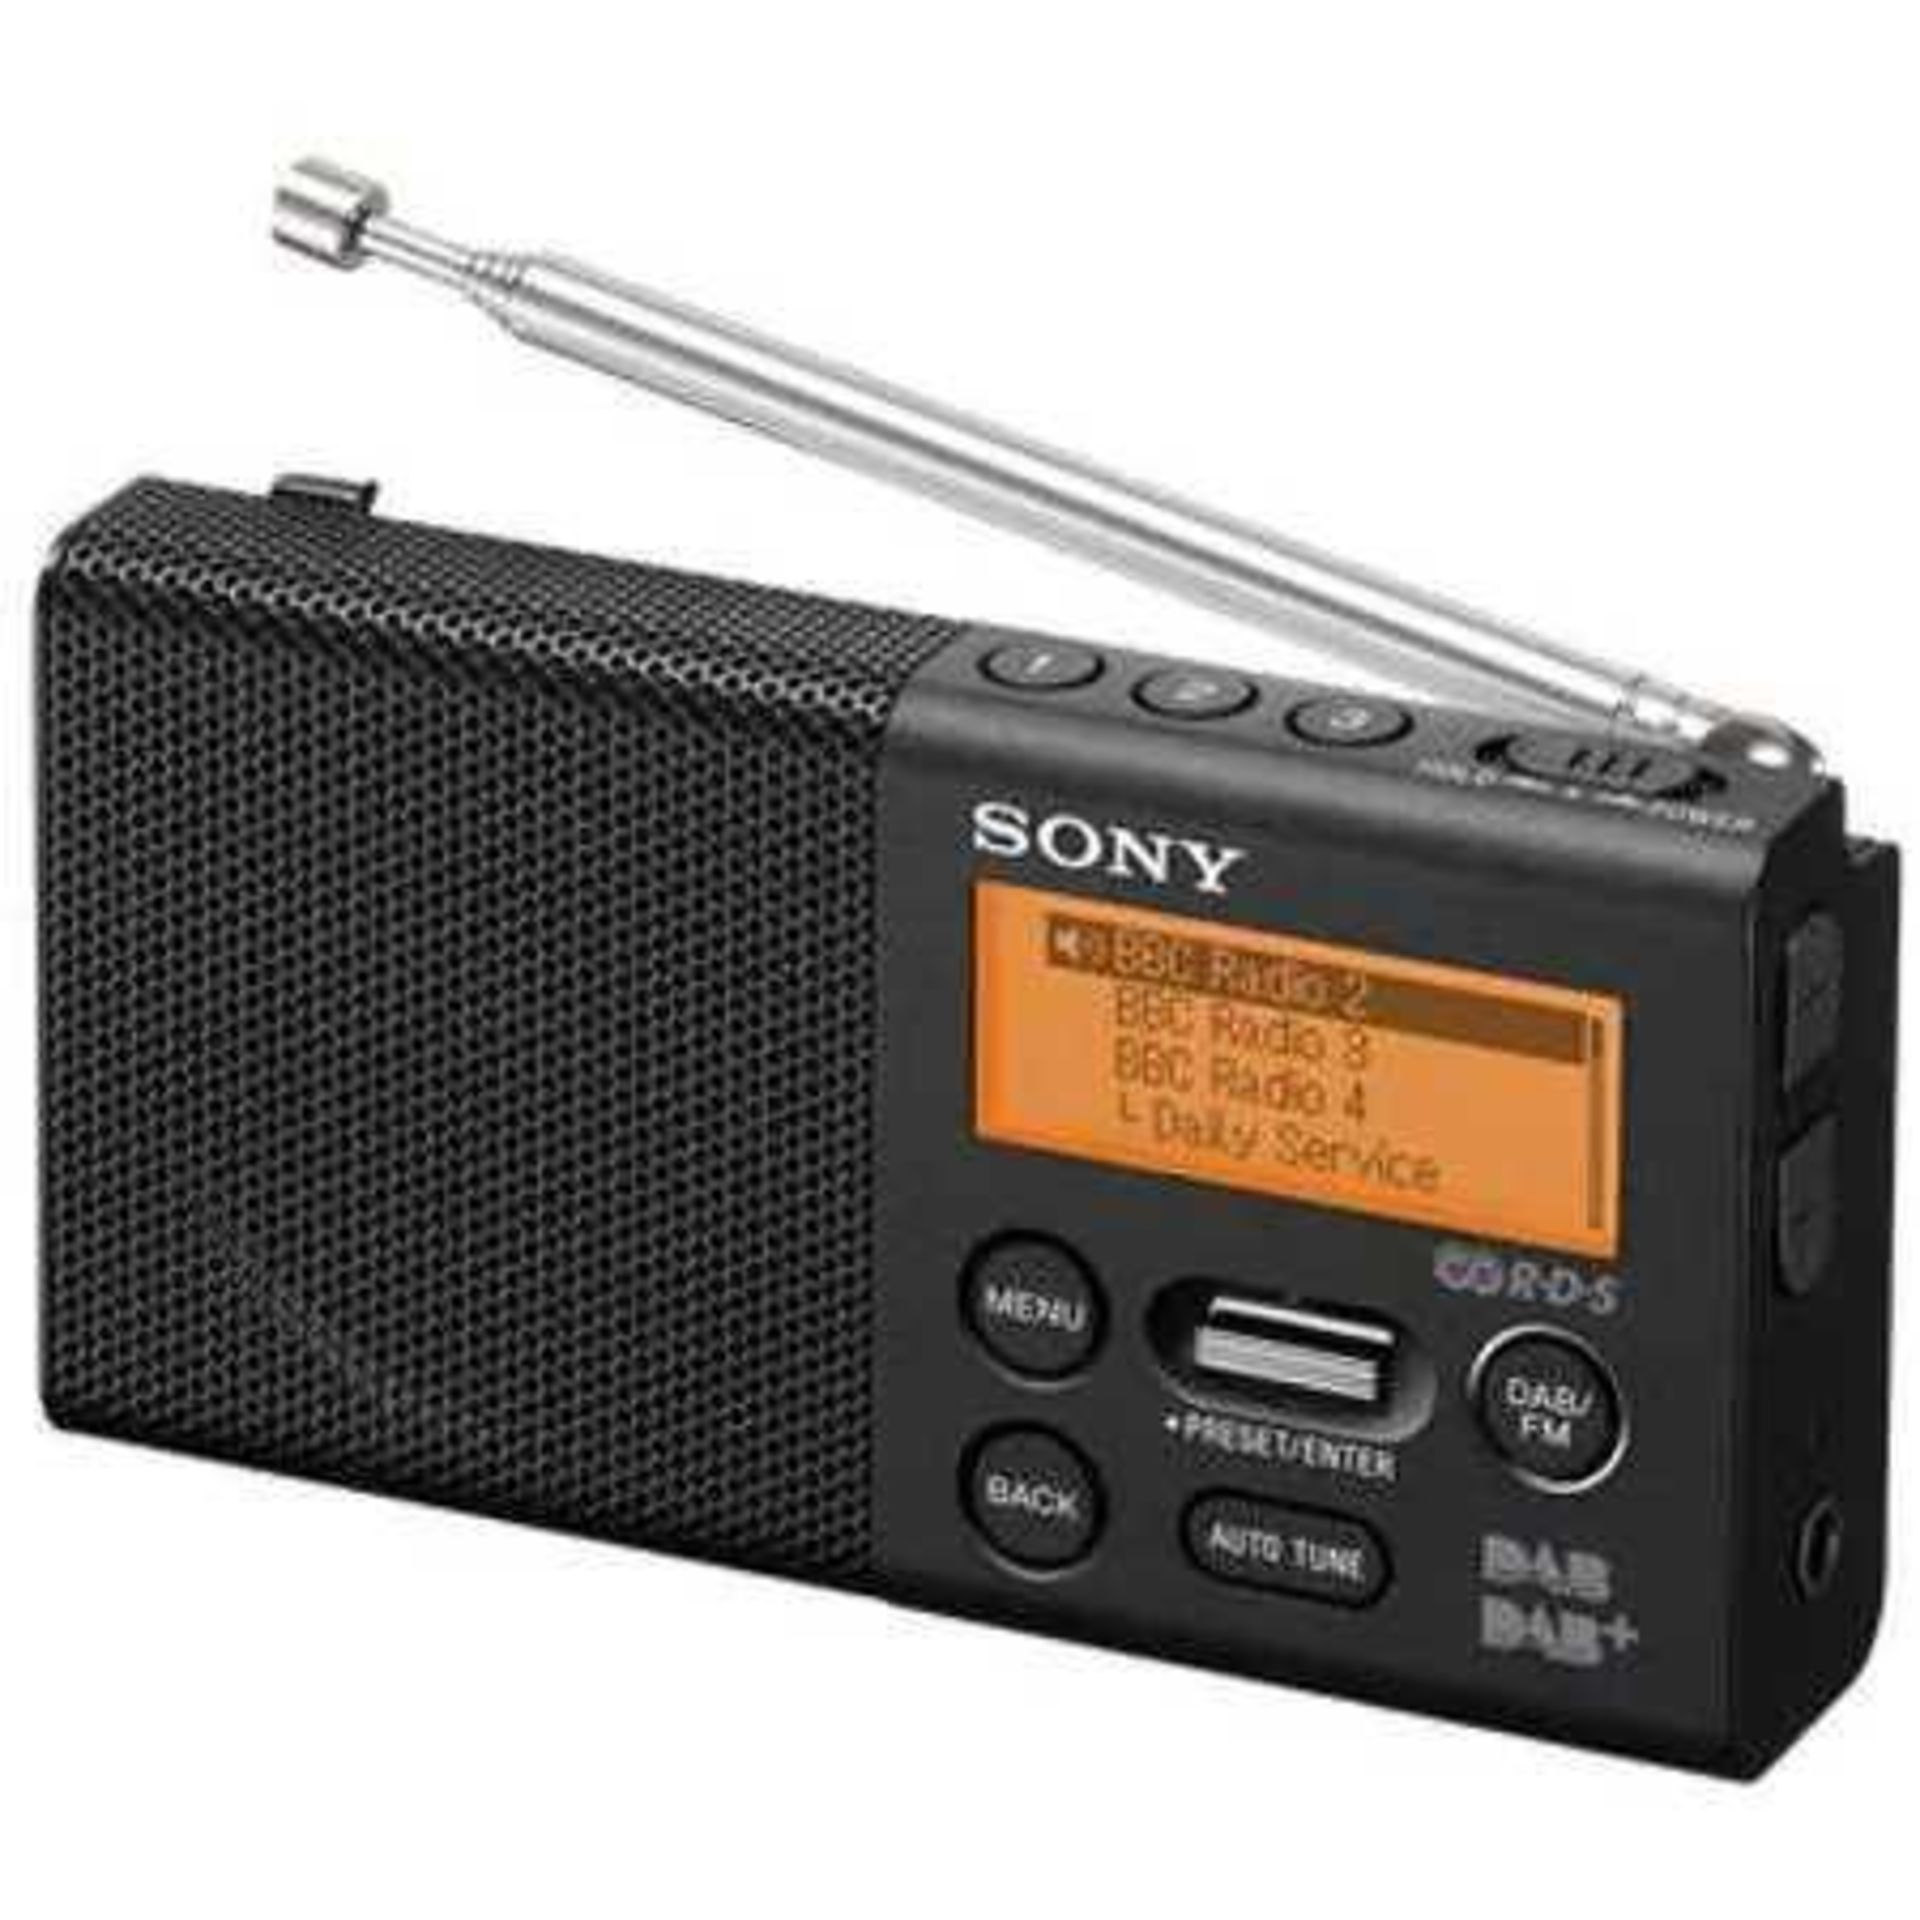 RRP 90 Boxed Sony Xdr-P1Dbp Digital Radio Dab Fm (00760594) (Appraisals Available Upon Request) (